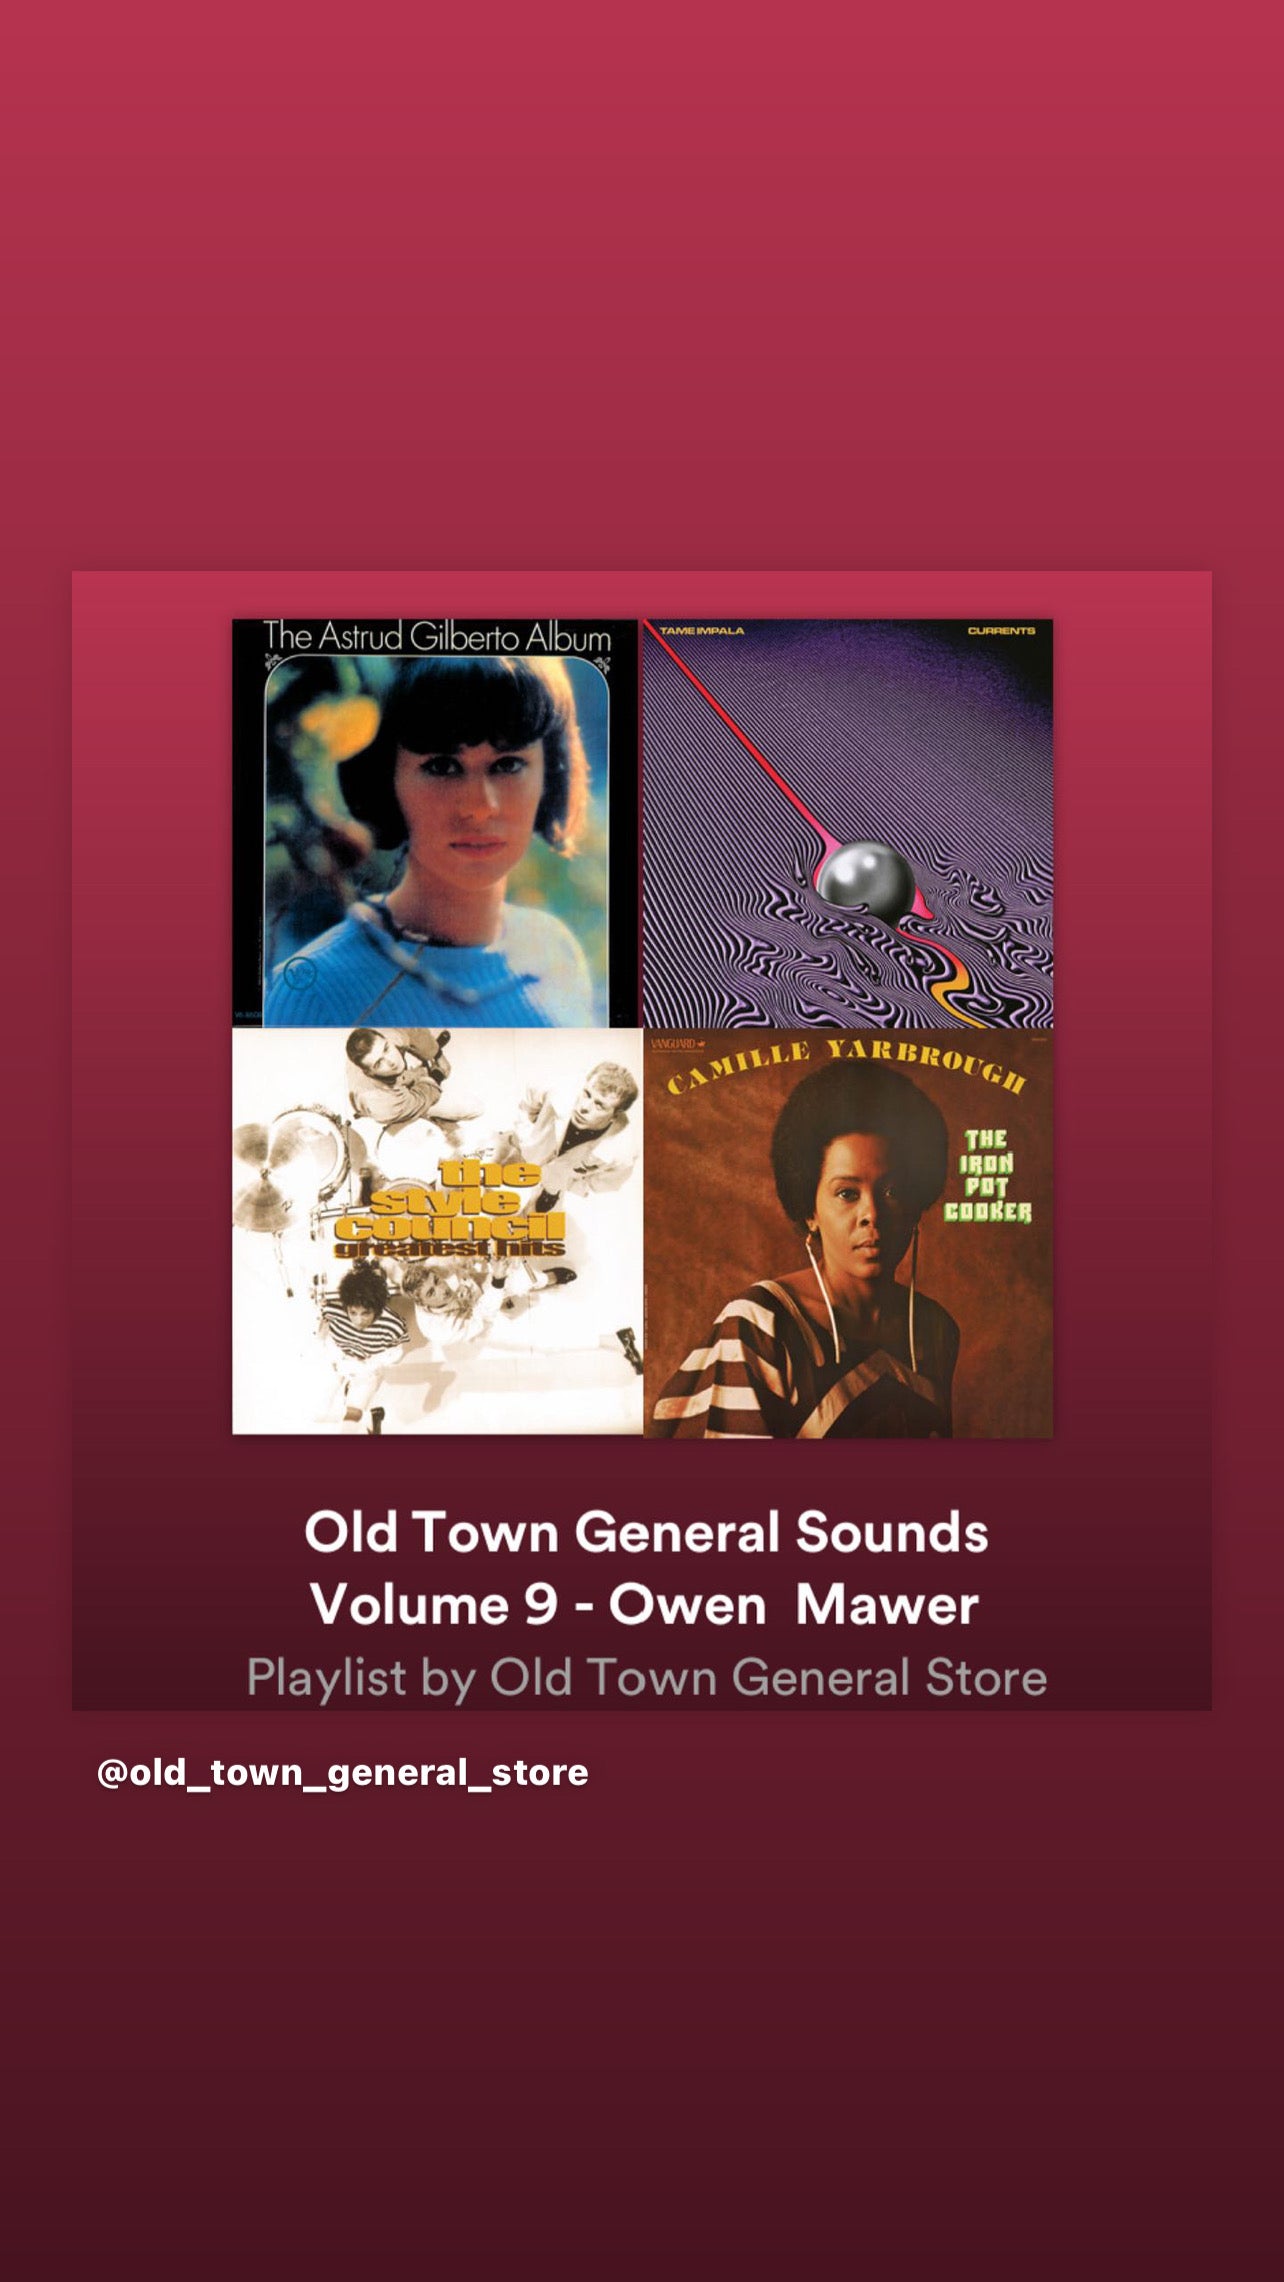 Old Town General Sounds volume 9 - Owen Mawer